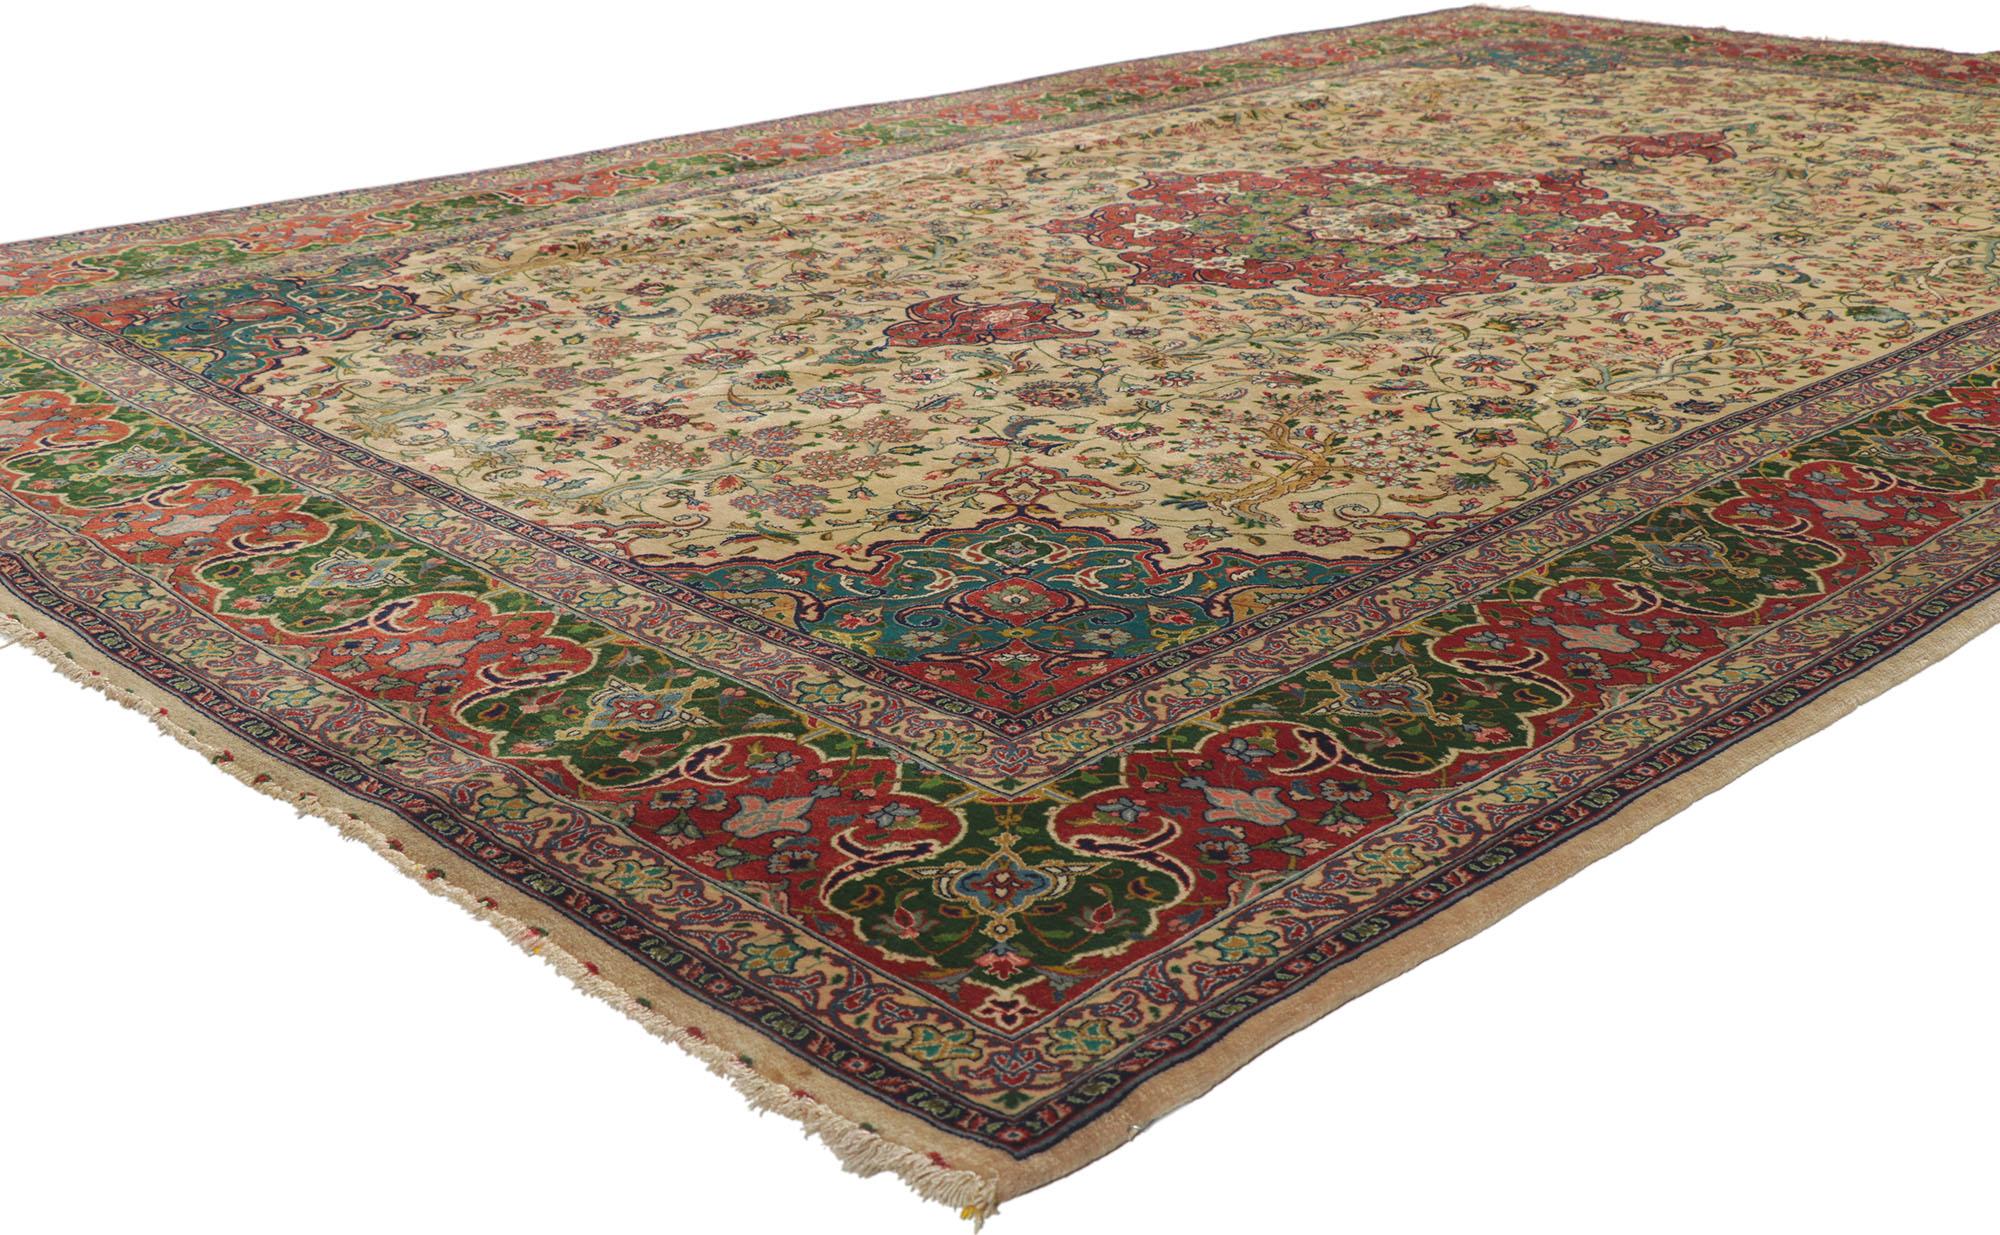 78170 Vintage Persian Tabriz rug, 06'06 x 10'05. With effortless beauty and ornate details, this hand-knotted wool vintage Persian Tabriz rug is poised to impress. Decadent beauty in a warm and regal color palette this vintage Persian Tabriz rug is